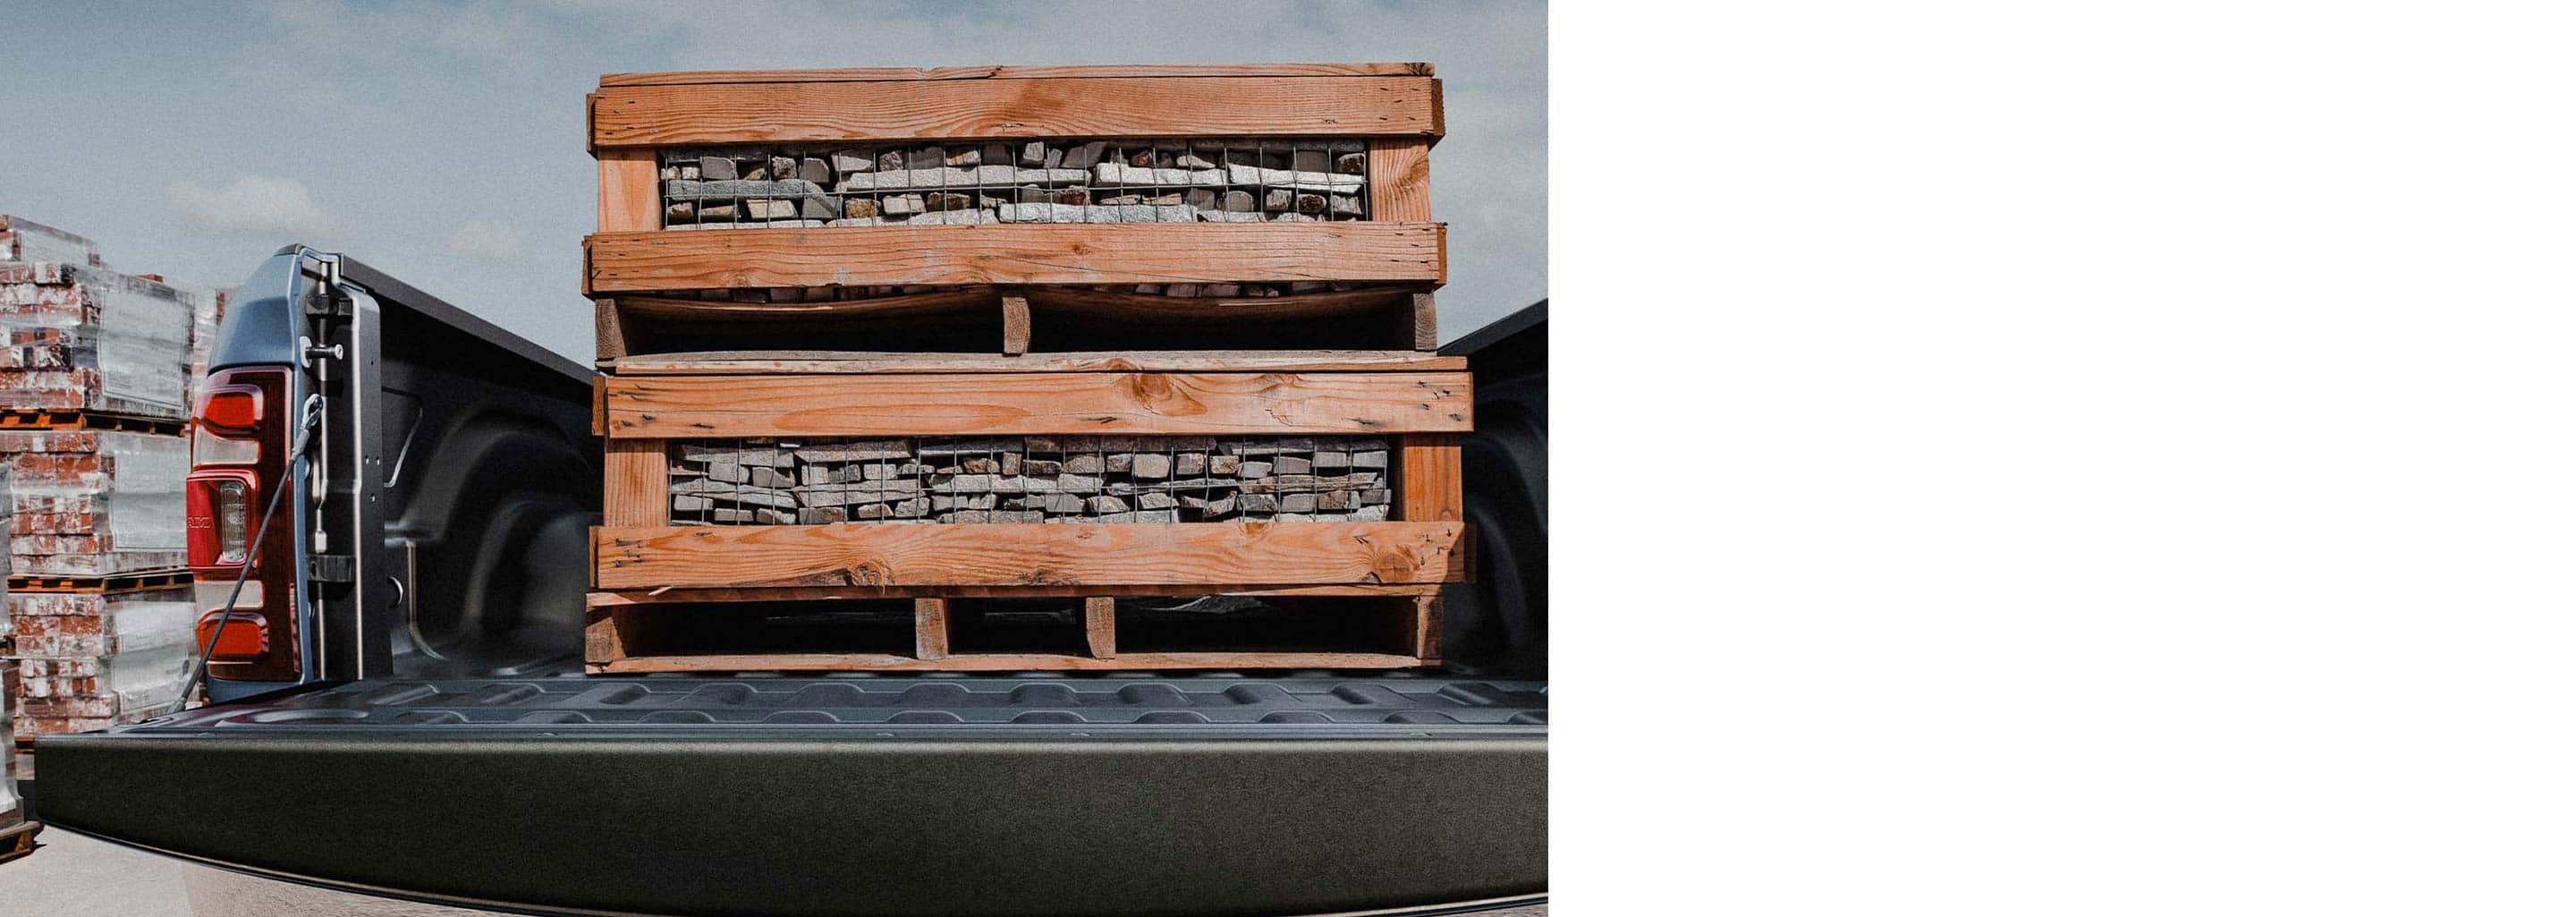 The bed of the 2022 Ram 2500 stacked with two pallets of paving stones.